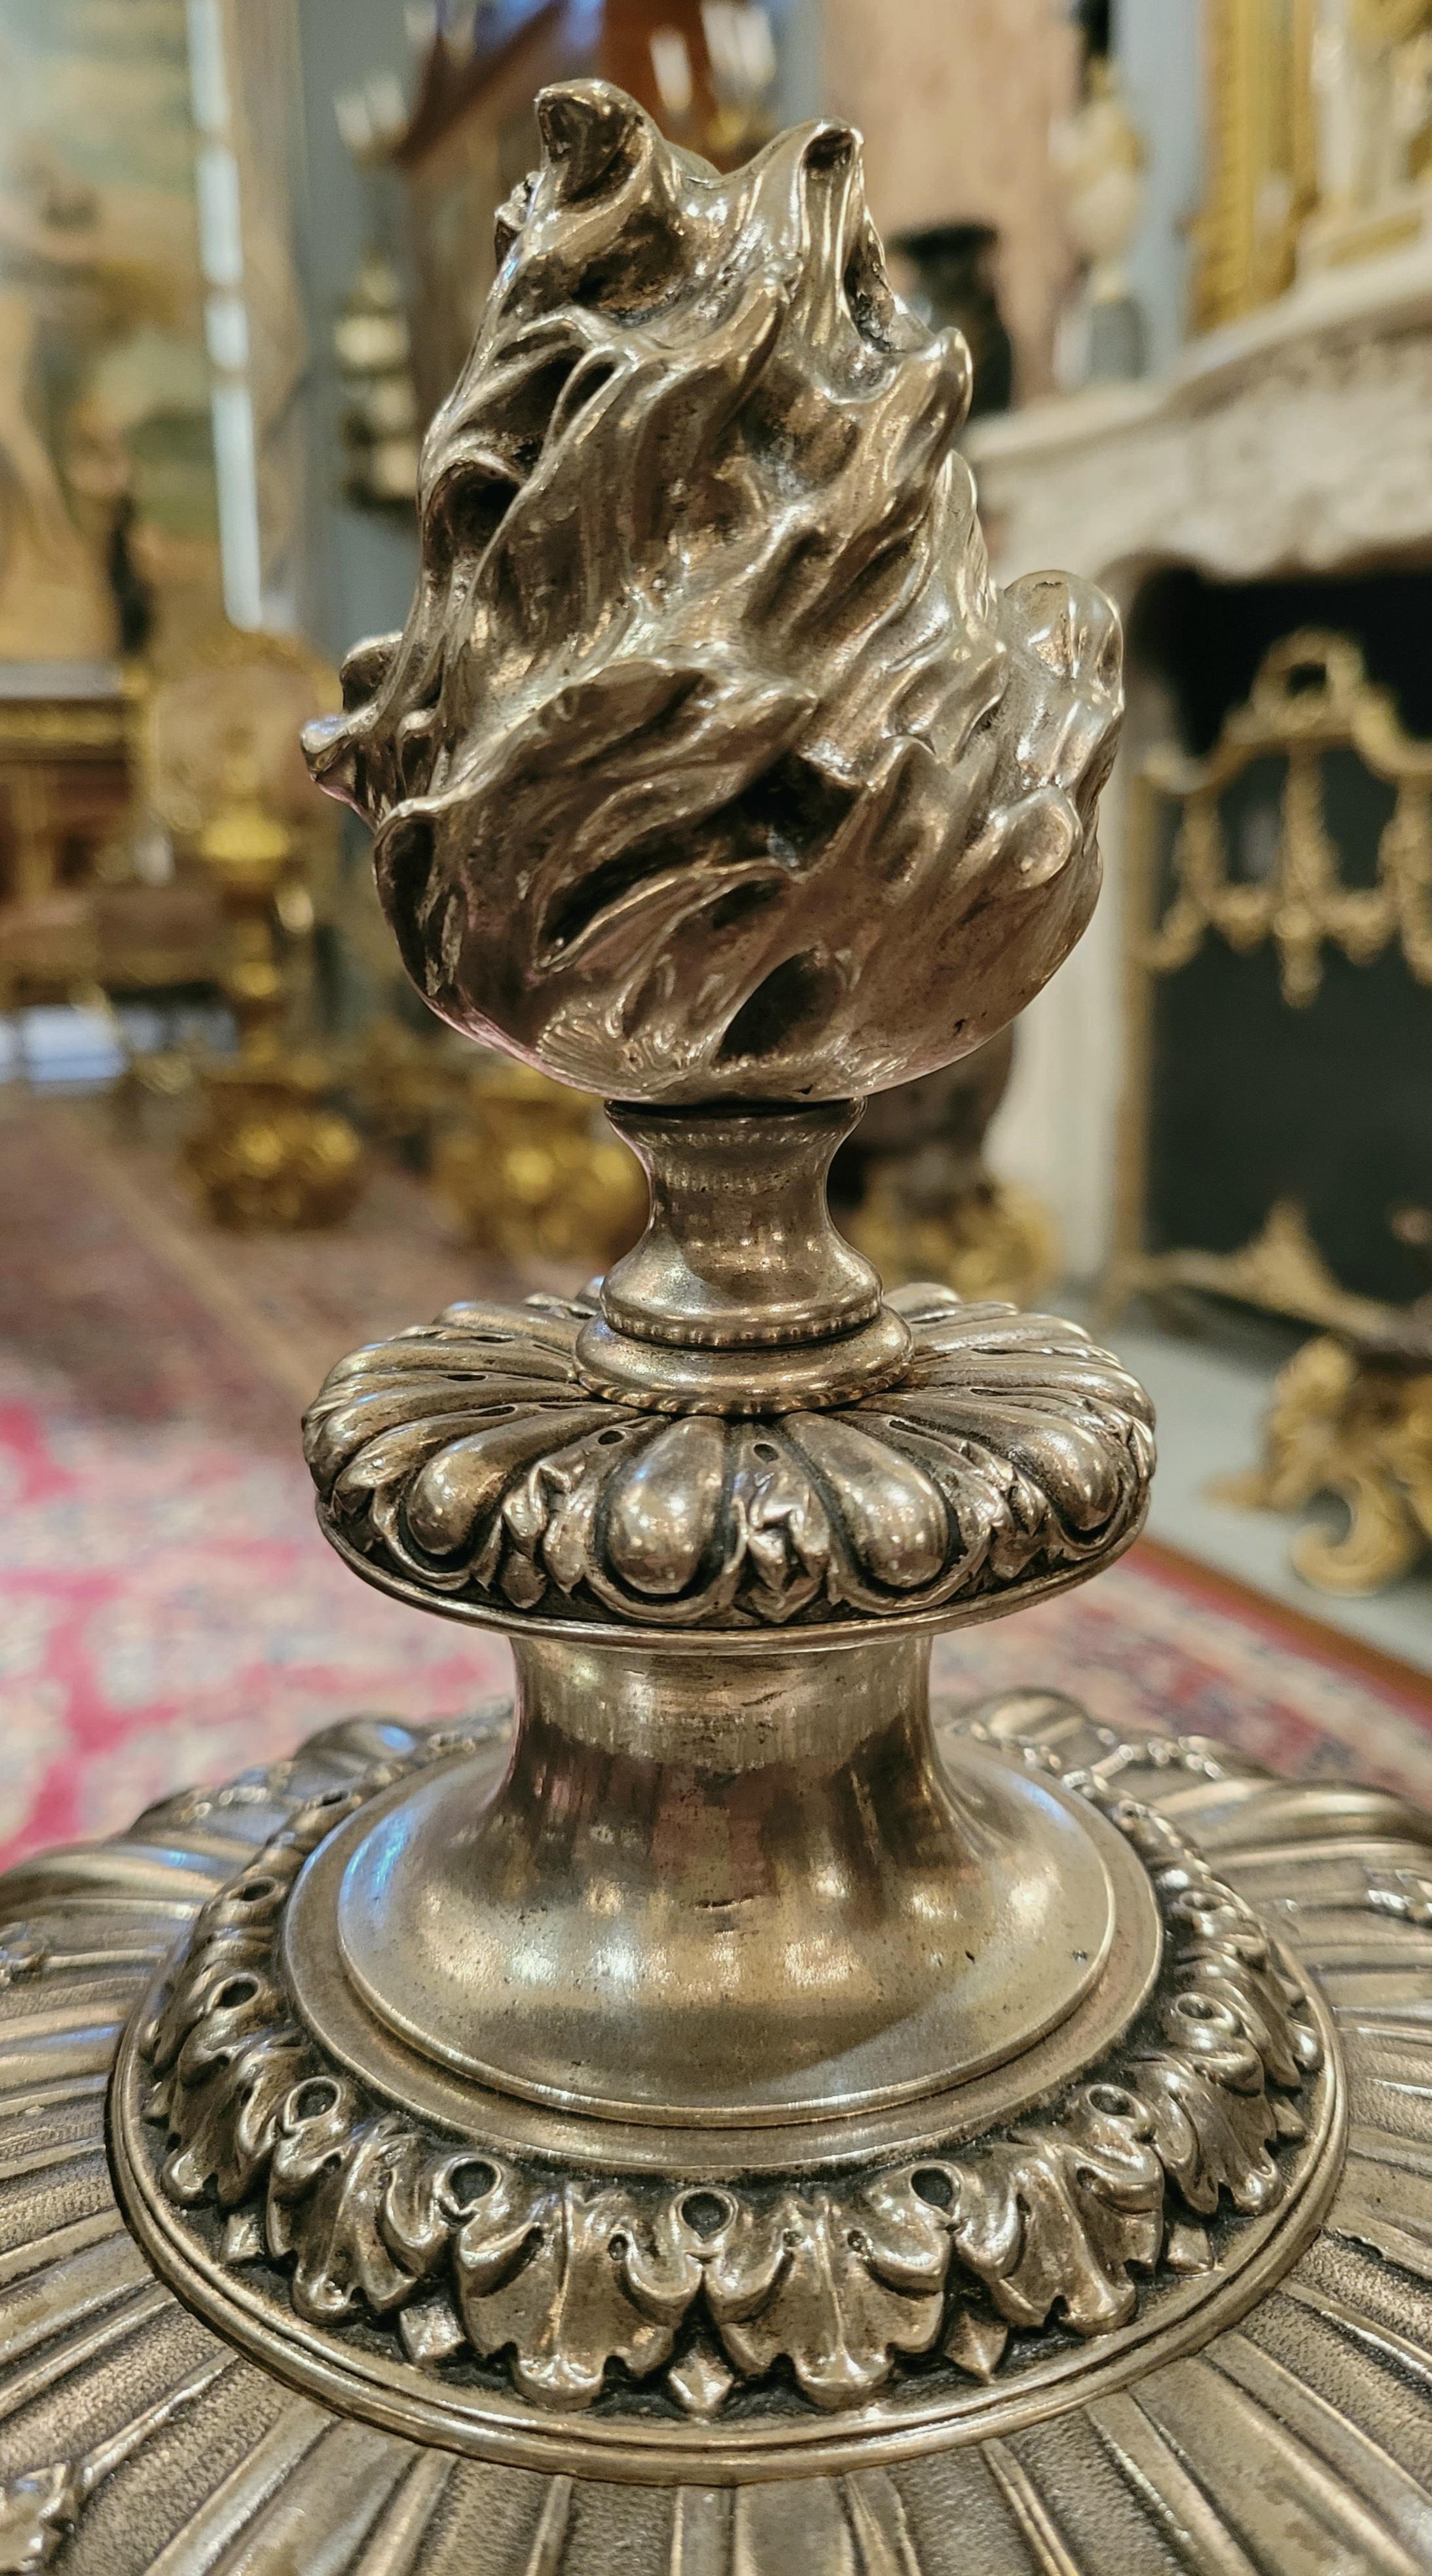 These handsome andirons are showpieces. The bronze work is rich in detail. It is difficult to capture their beauty in photographs.